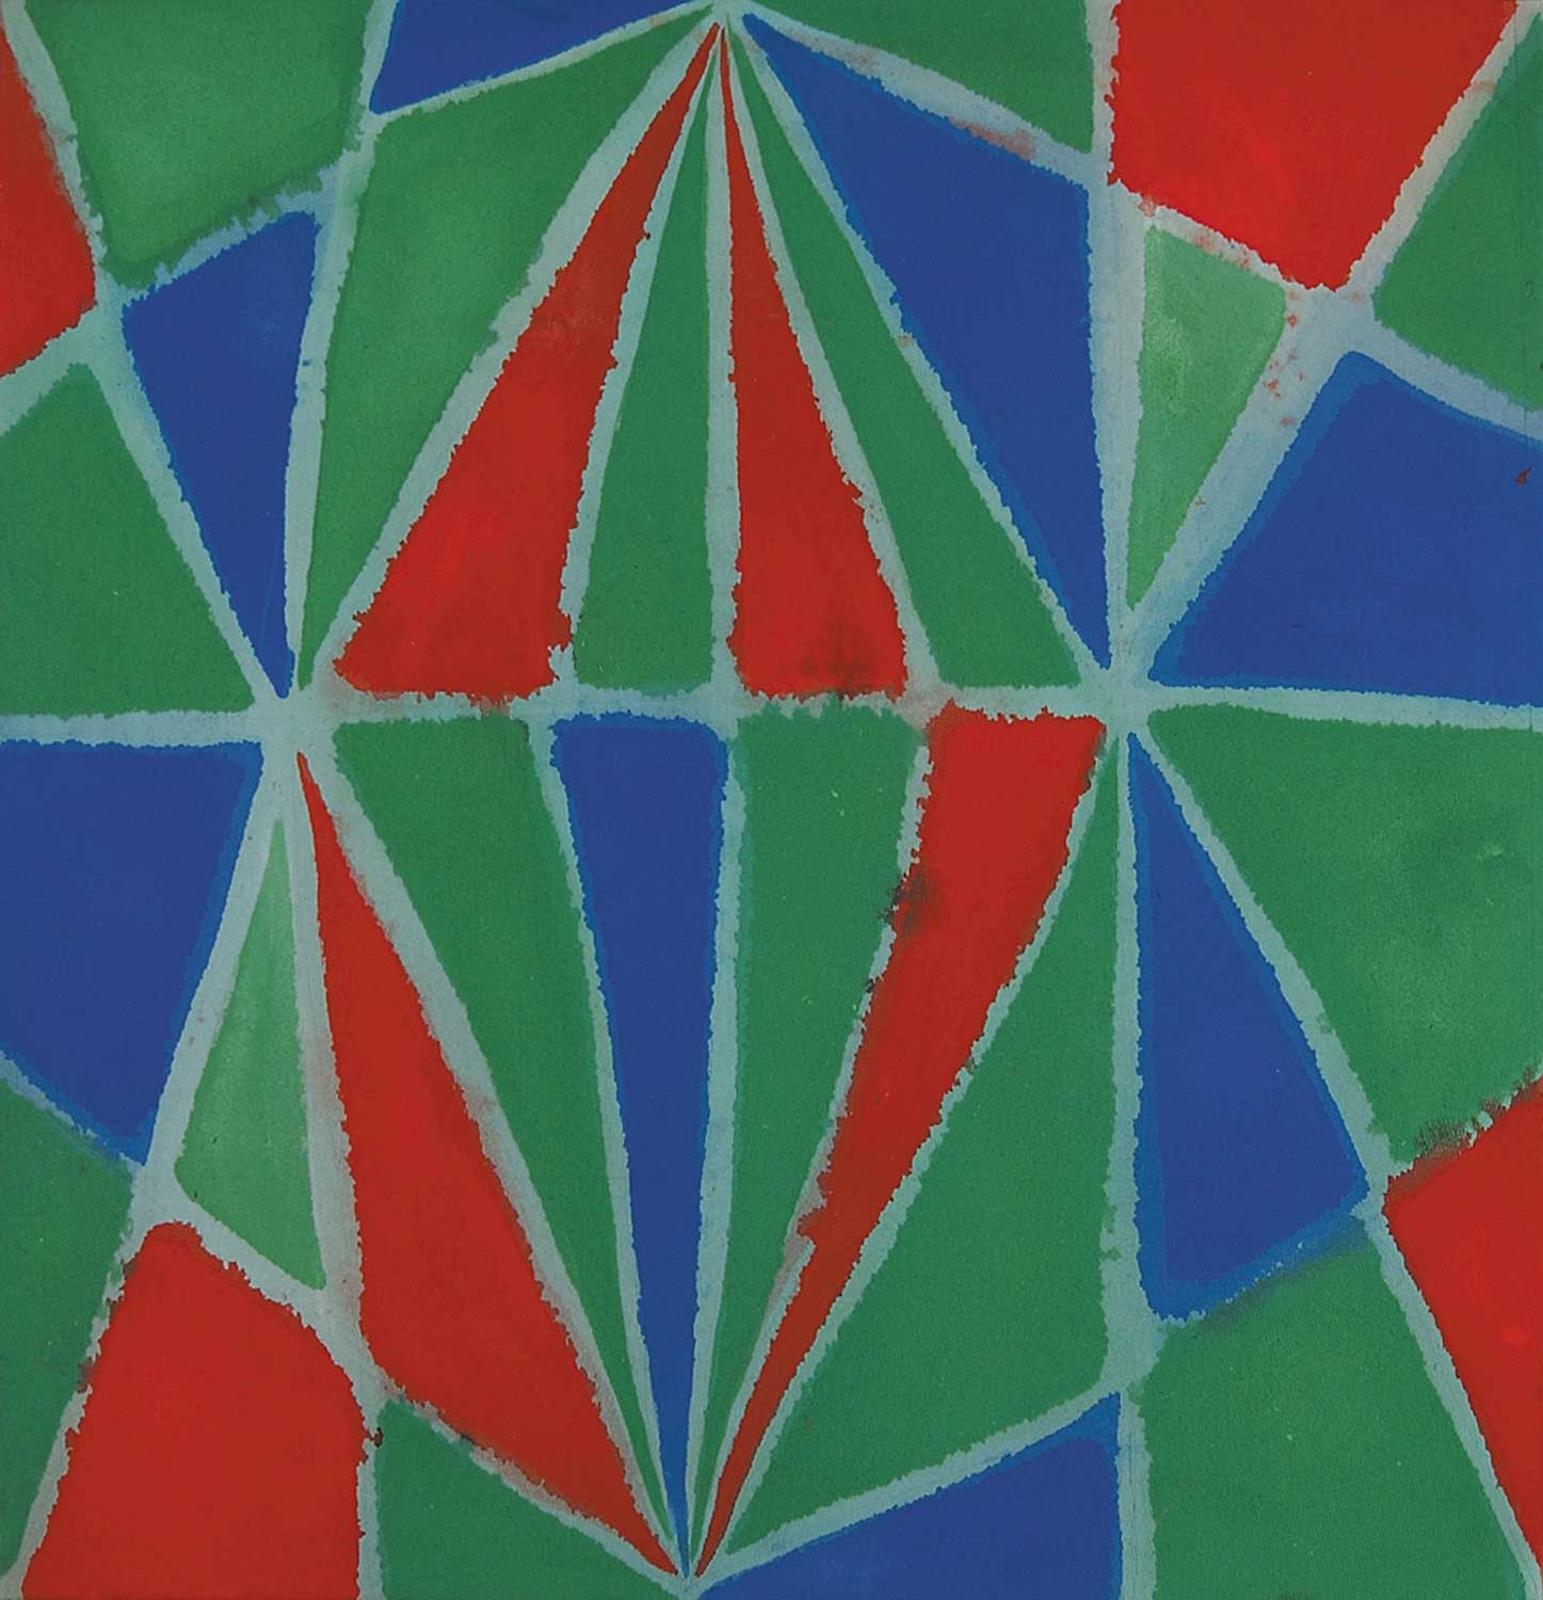 Marian Mildred Dale Scott (1906-1993) - Untitled - Abstract in Blue, Green and Red